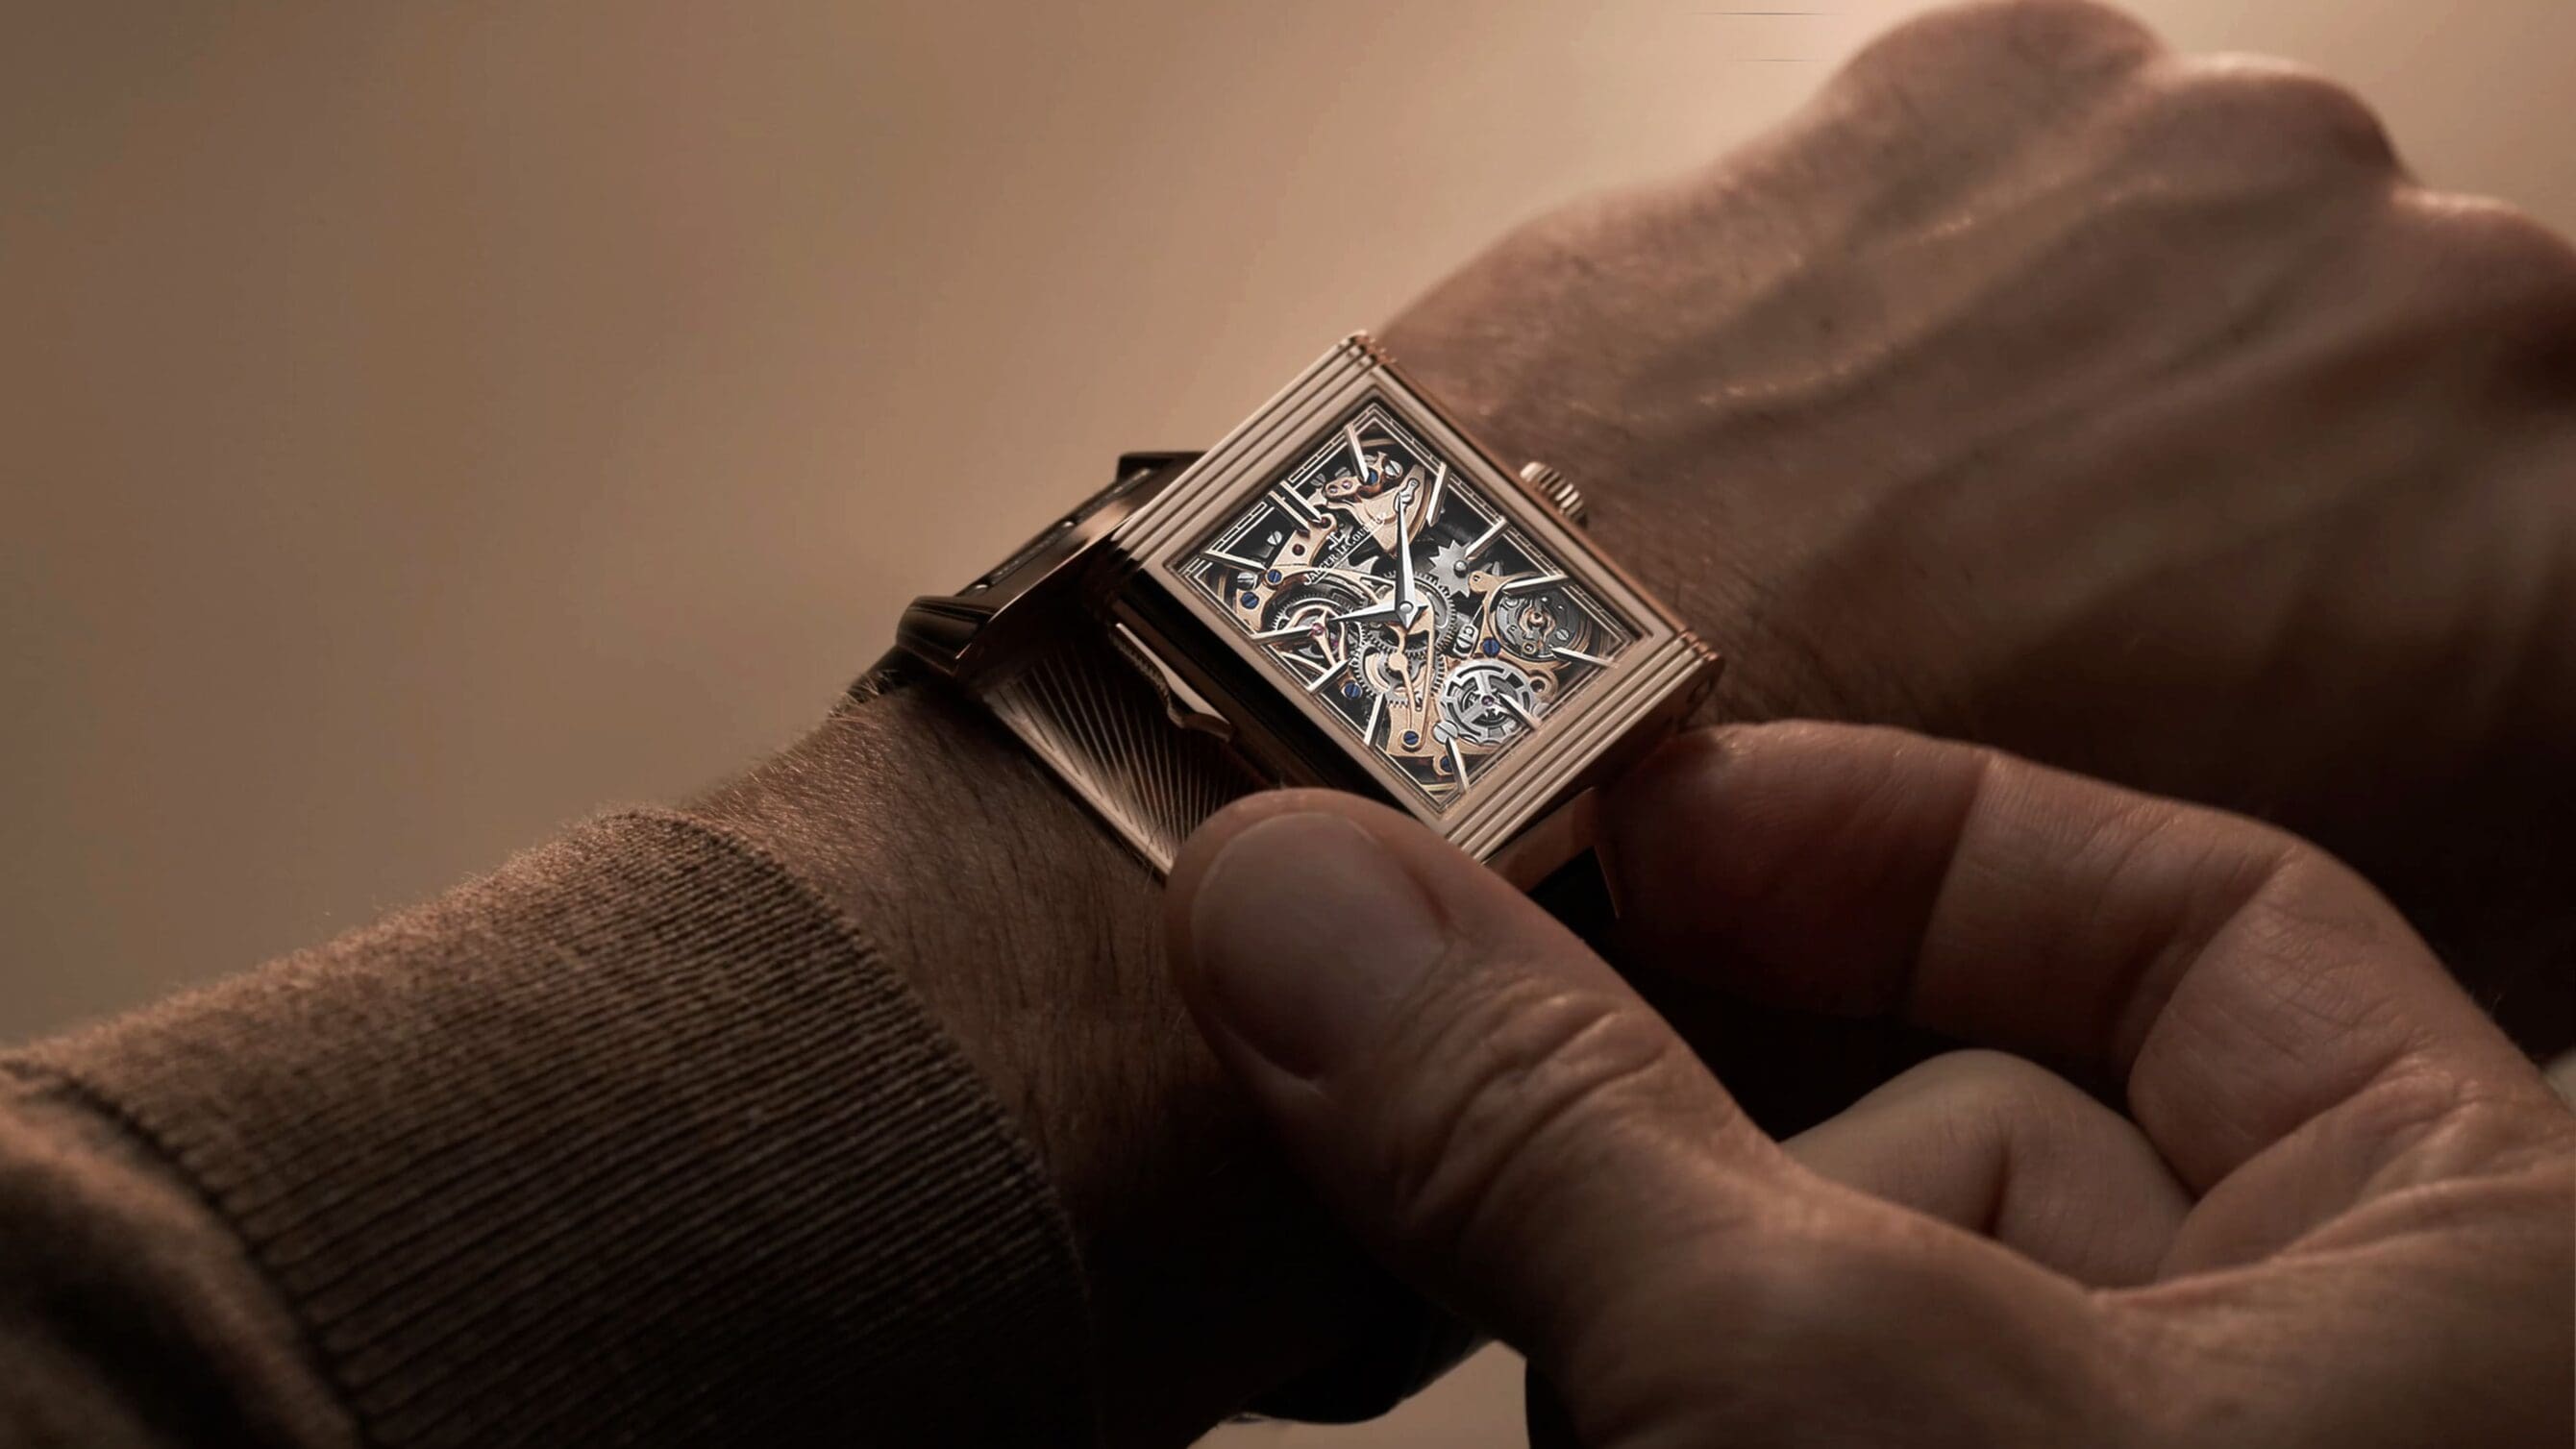 INTRODUCING: The Jaeger-LeCoultre Reverso Tribute Minute Repeater Limited Edition